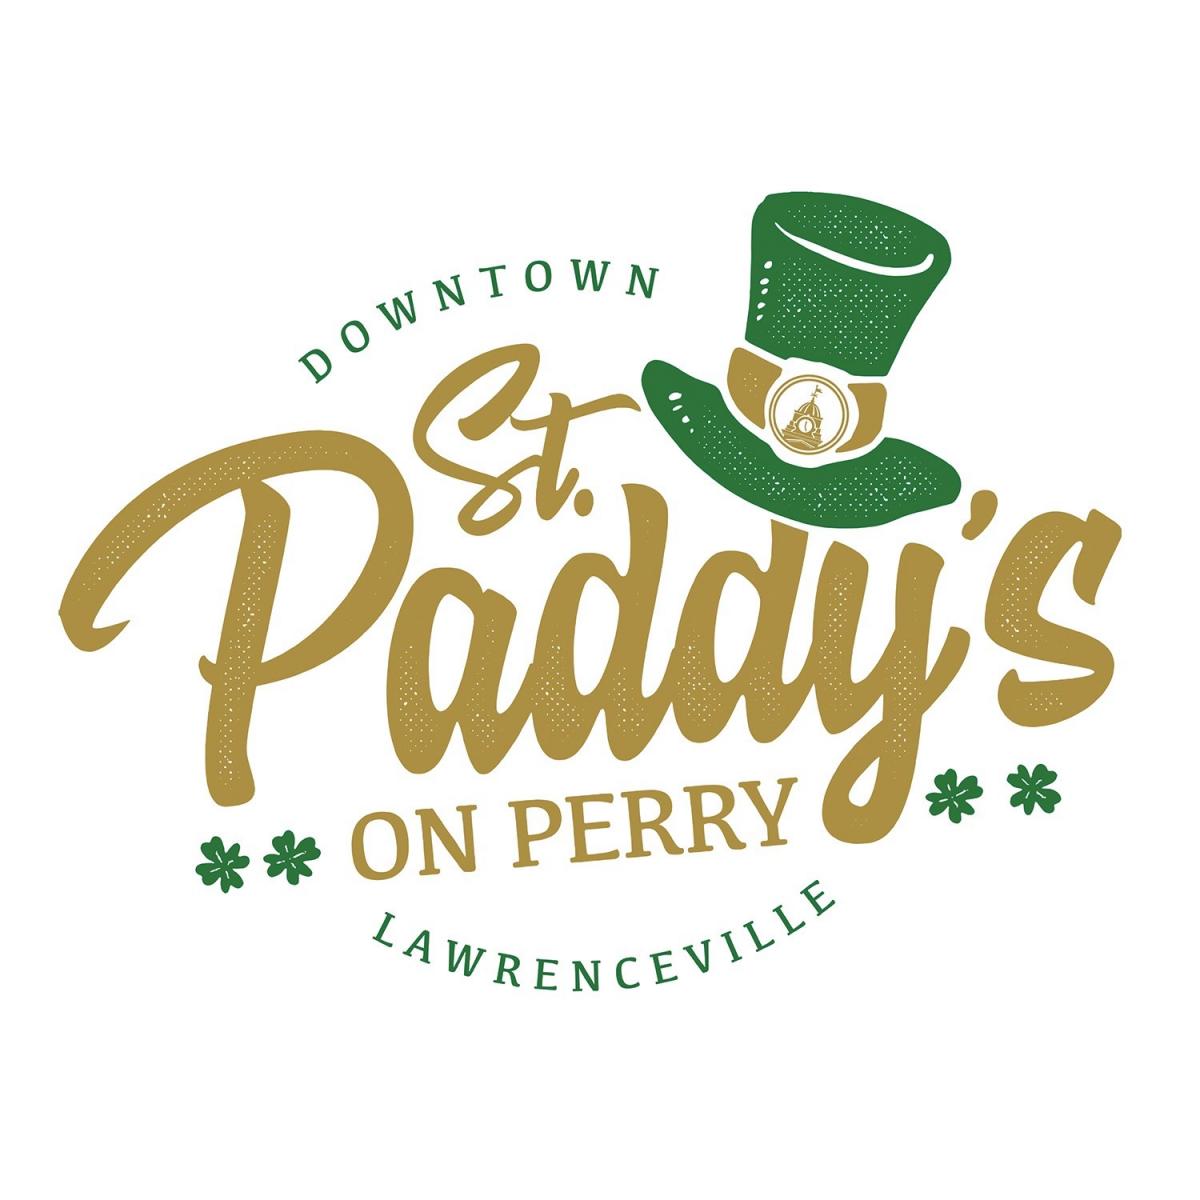 St Paddy's on Perry cover image